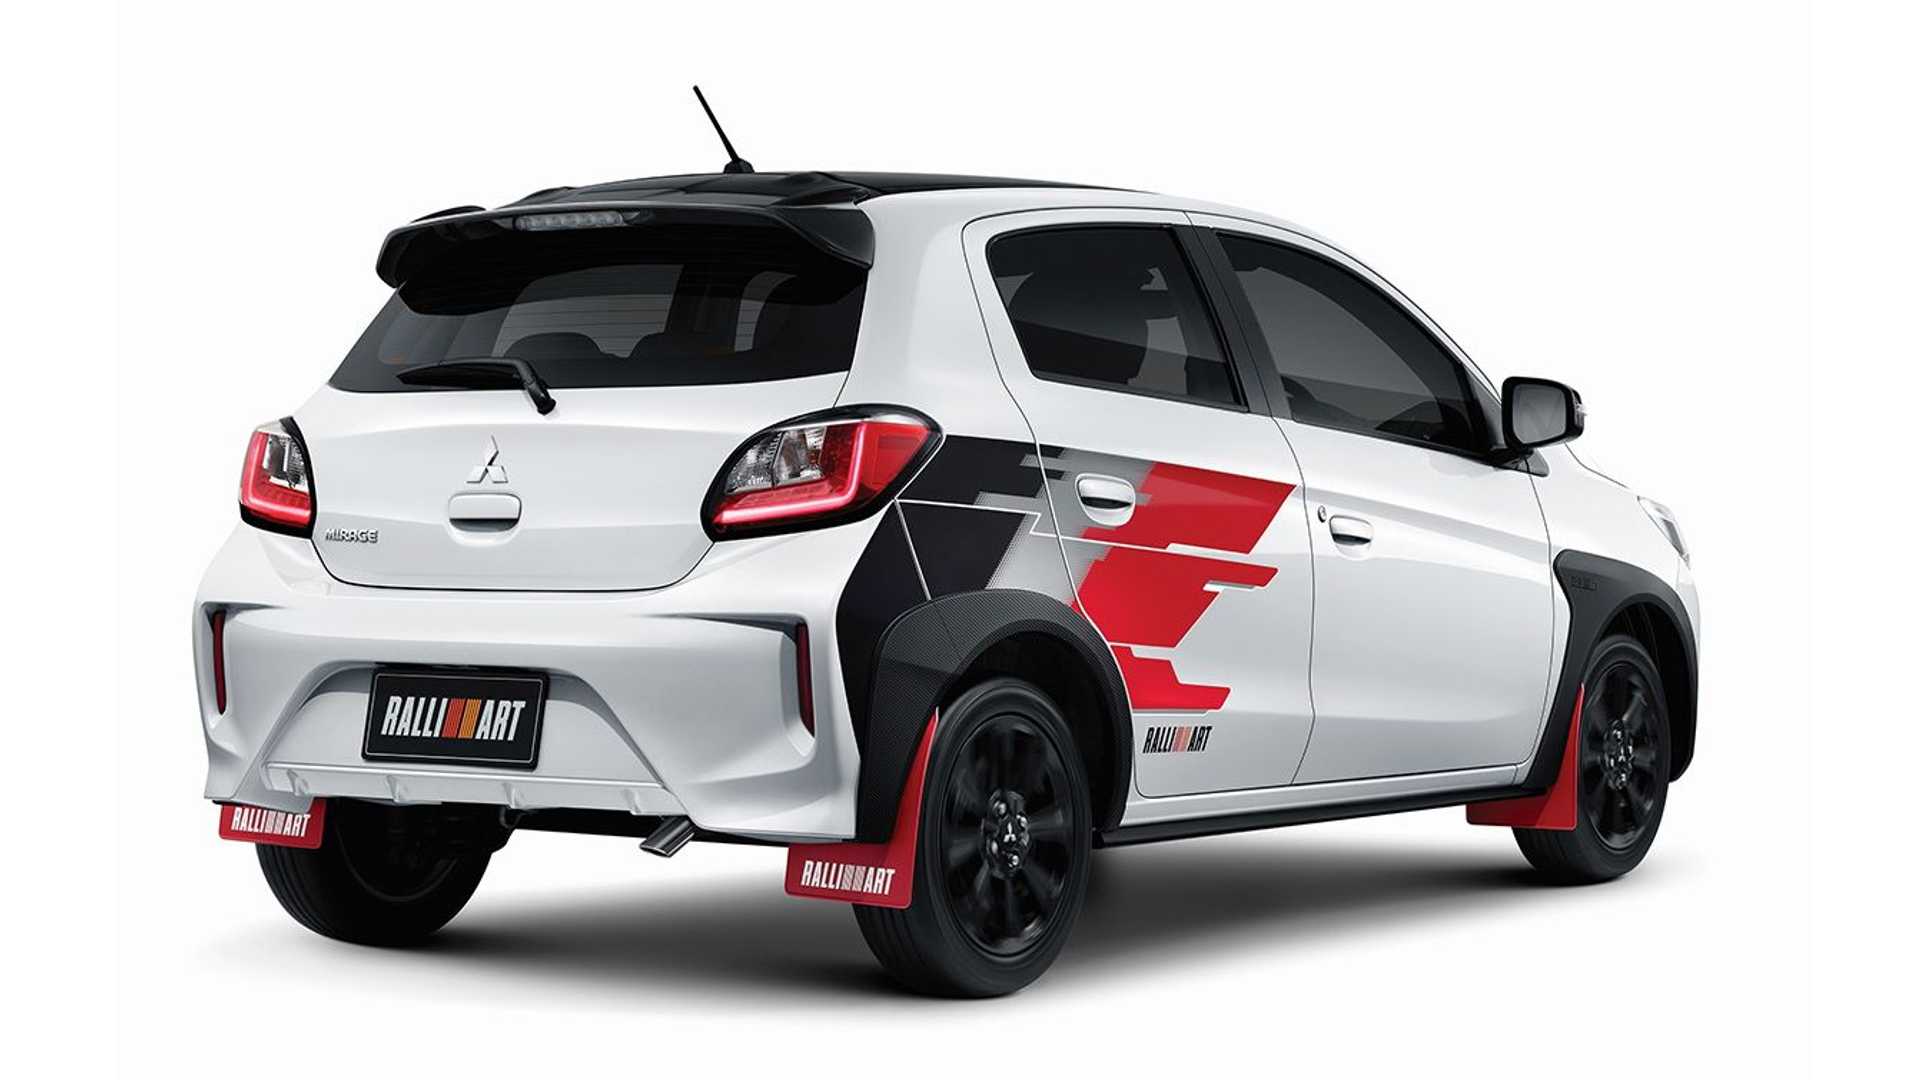 Ralliart disappoints us with its new Mitsubishi Space Star